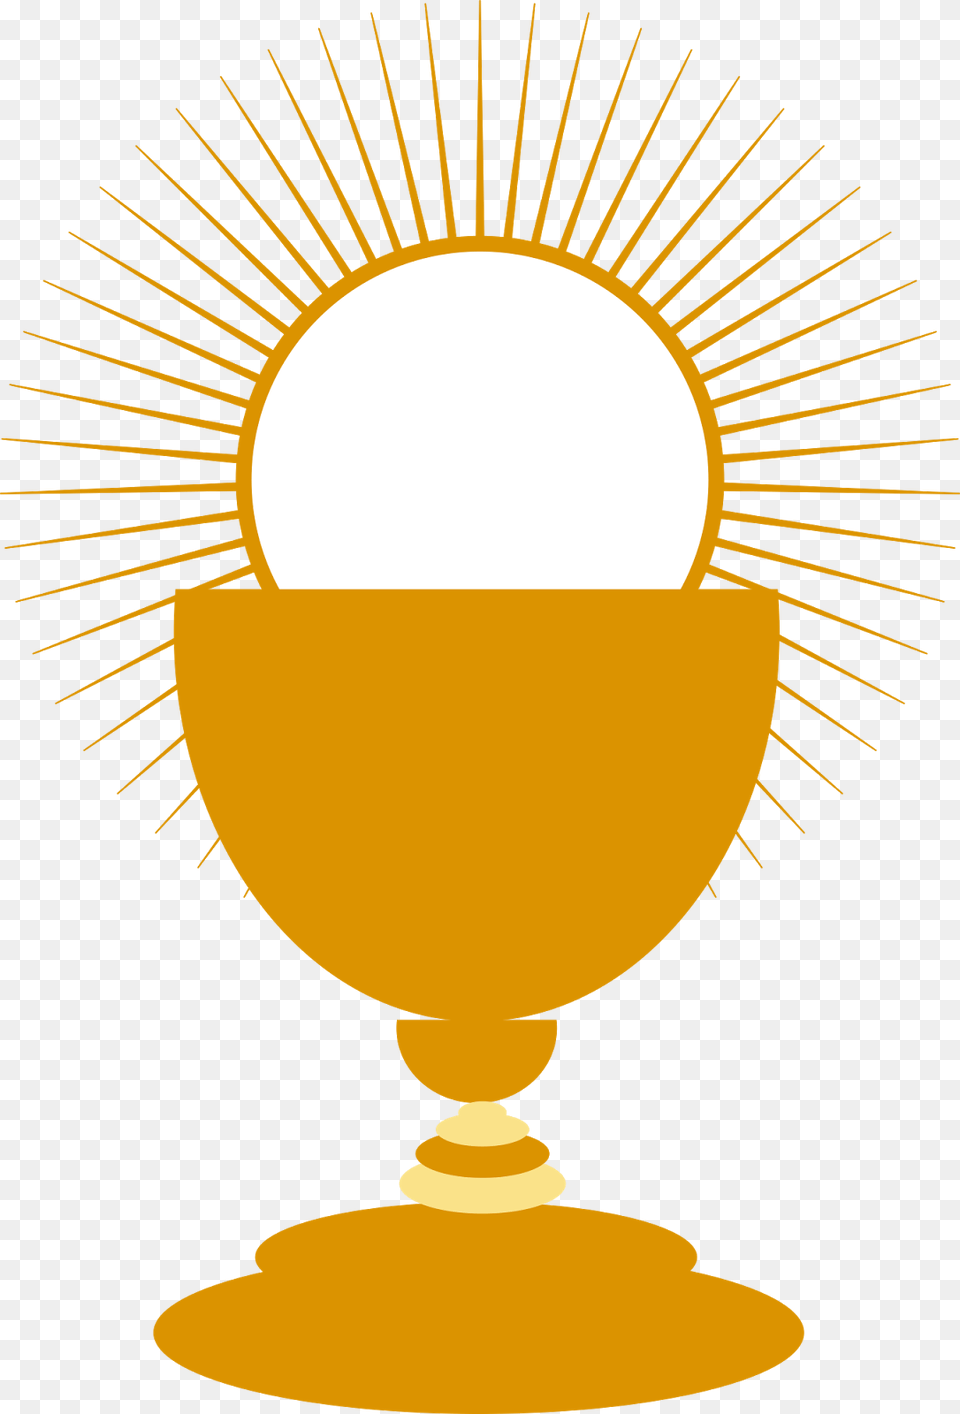 Cup Clipart Sacrament Dr Bhagwat Sahay Govt College Gwalior, Glass, Goblet, Trophy Free Png Download